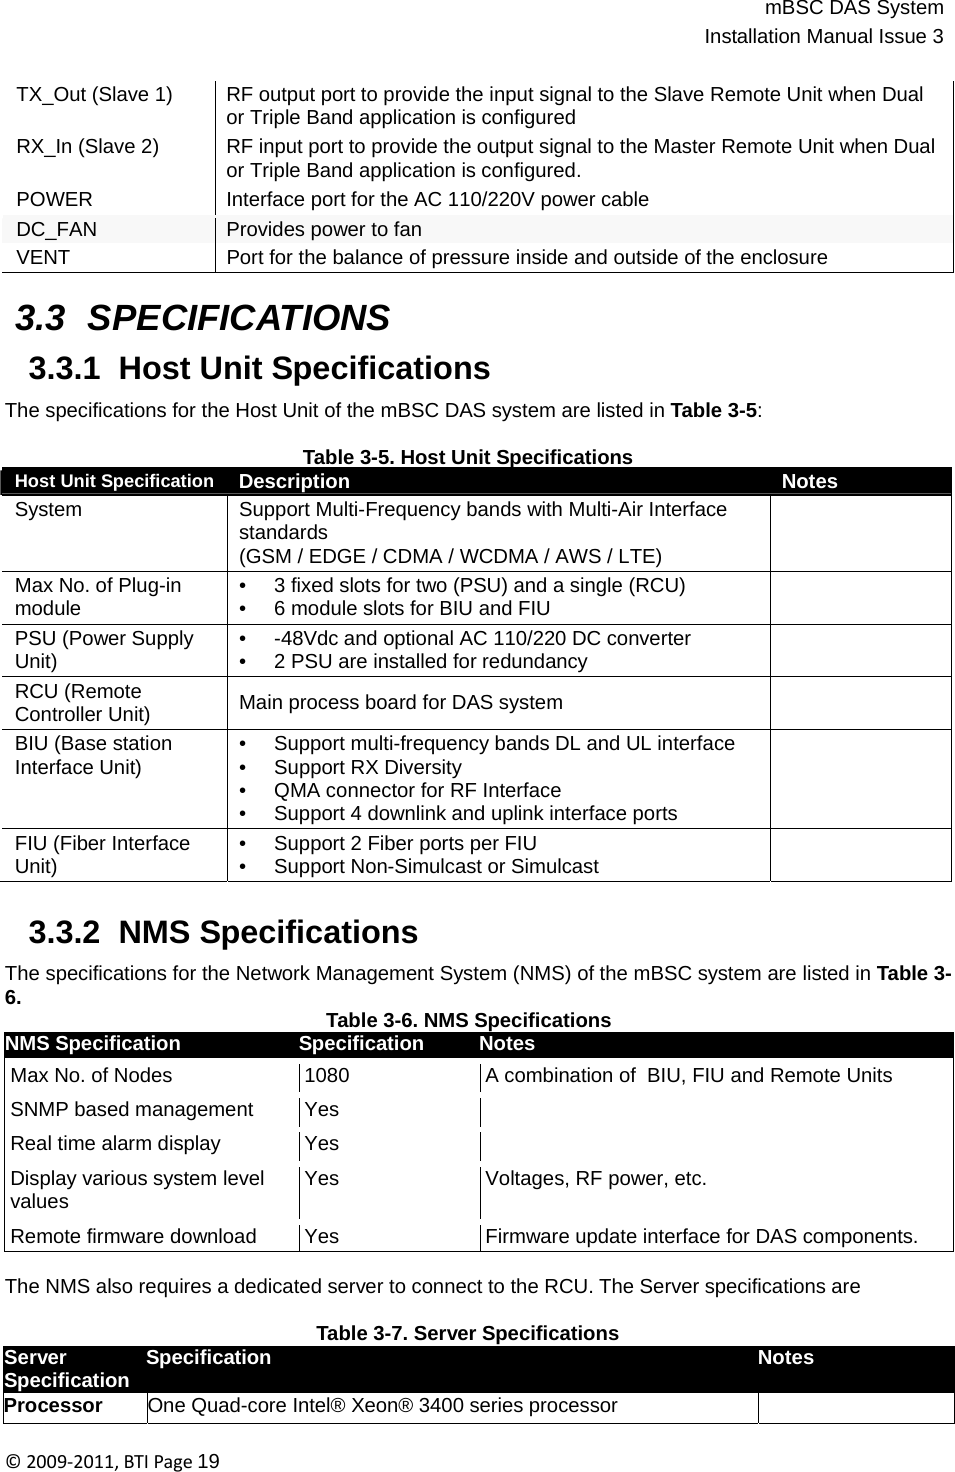 mBSC DAS SystemInstallation Manual Issue 3©2009‐2011,BTIPage19   Host Unit Specification  Description Notes System Support Multi-Frequency bands with Multi-Air Interface standards (GSM / EDGE / CDMA / WCDMA / AWS / LTE)  Max No. of Plug-in module •  3 fixed slots for two (PSU) and a single (RCU) •  6 module slots for BIU and FIU  PSU (Power Supply Unit) •  -48Vdc and optional AC 110/220 DC converter •  2 PSU are installed for redundancy  RCU (Remote Controller Unit)  Main process board for DAS system  BIU (Base station Interface Unit) •  Support multi-frequency bands DL and UL interface • Support RX Diversity •  QMA connector for RF Interface •  Support 4 downlink and uplink interface ports  FIU (Fiber Interface Unit) •  Support 2 Fiber ports per FIU •  Support Non-Simulcast or Simulcast   TX_Out (Slave 1) RX_In (Slave 2) POWER RF output port to provide the input signal to the Slave Remote Unit when Dual or Triple Band application is configured RF input port to provide the output signal to the Master Remote Unit when Dual or Triple Band application is configured. Interface port for the AC 110/220V power cable DC_FAN Provides power to fan VENT Port for the balance of pressure inside and outside of the enclosure  3.3 SPECIFICATIONS  3.3.1  Host Unit Specifications  The specifications for the Host Unit of the mBSC DAS system are listed in Table 3-5:  Table 3-5. Host Unit Specifications                       3.3.2  NMS Specifications  The specifications for the Network Management System (NMS) of the mBSC system are listed in Table 3- 6. Table 3-6. NMS Specifications NMS Specification  Specification  Notes Max No. of Nodes 1080 A combination of  BIU, FIU and Remote Units SNMP based management Yes  Real time alarm display Yes  Display various system level values Yes Voltages, RF power, etc. Remote firmware download Yes Firmware update interface for DAS components.  The NMS also requires a dedicated server to connect to the RCU. The Server specifications are  Table 3-7. Server Specifications  Server Specification  Notes Specification Processor One Quad-core Intel® Xeon® 3400 series processor  